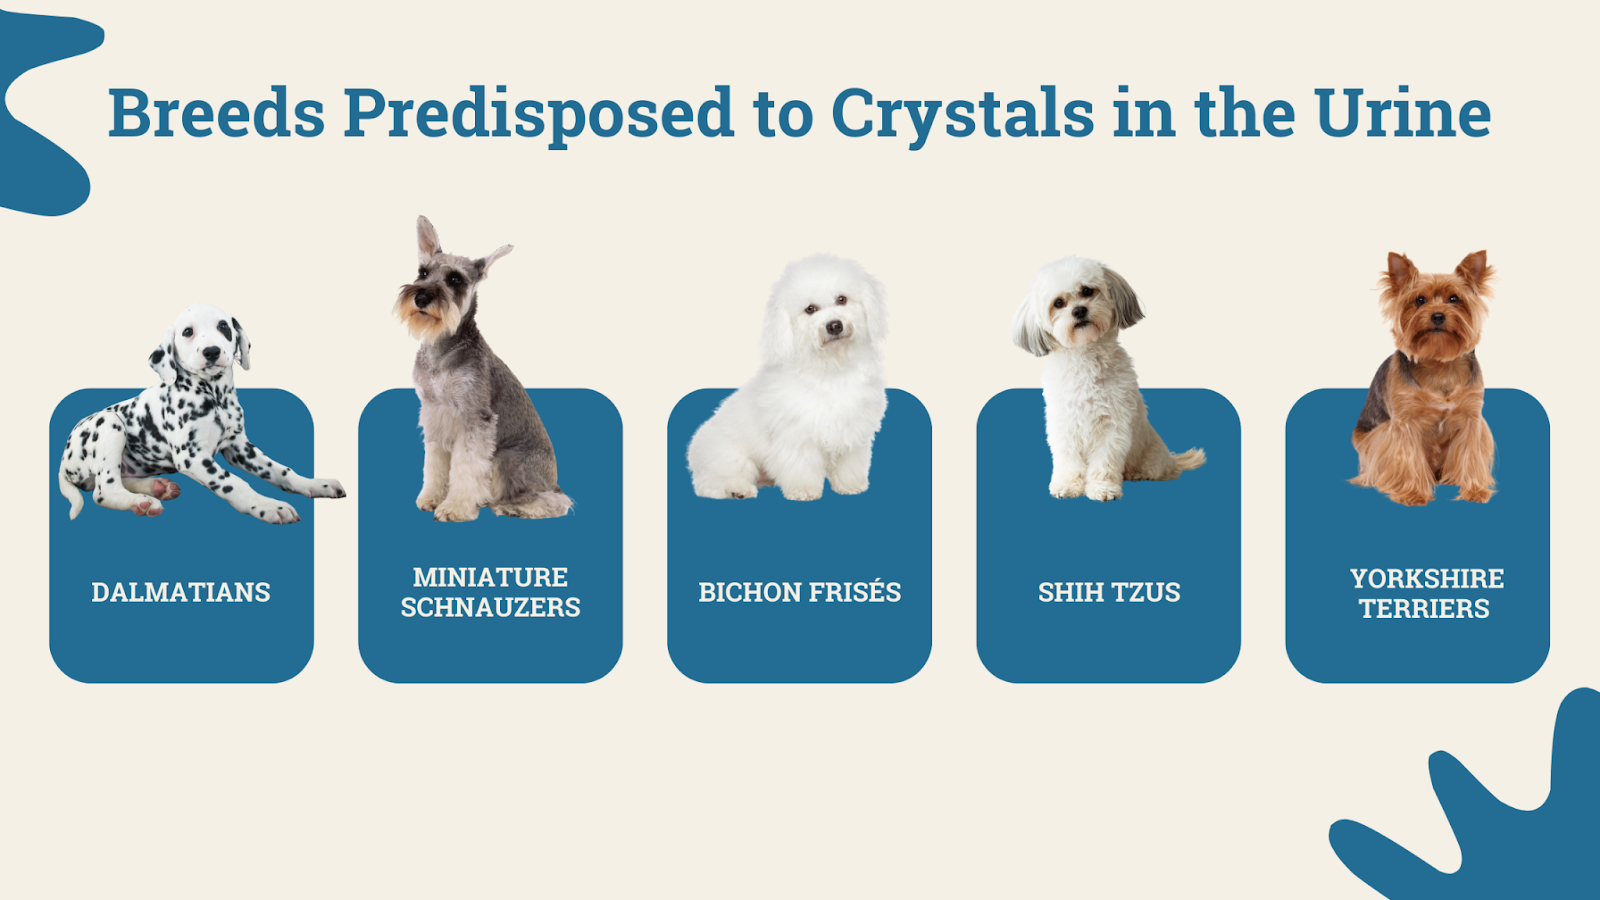 Breeds predisposed to crystals in the urine